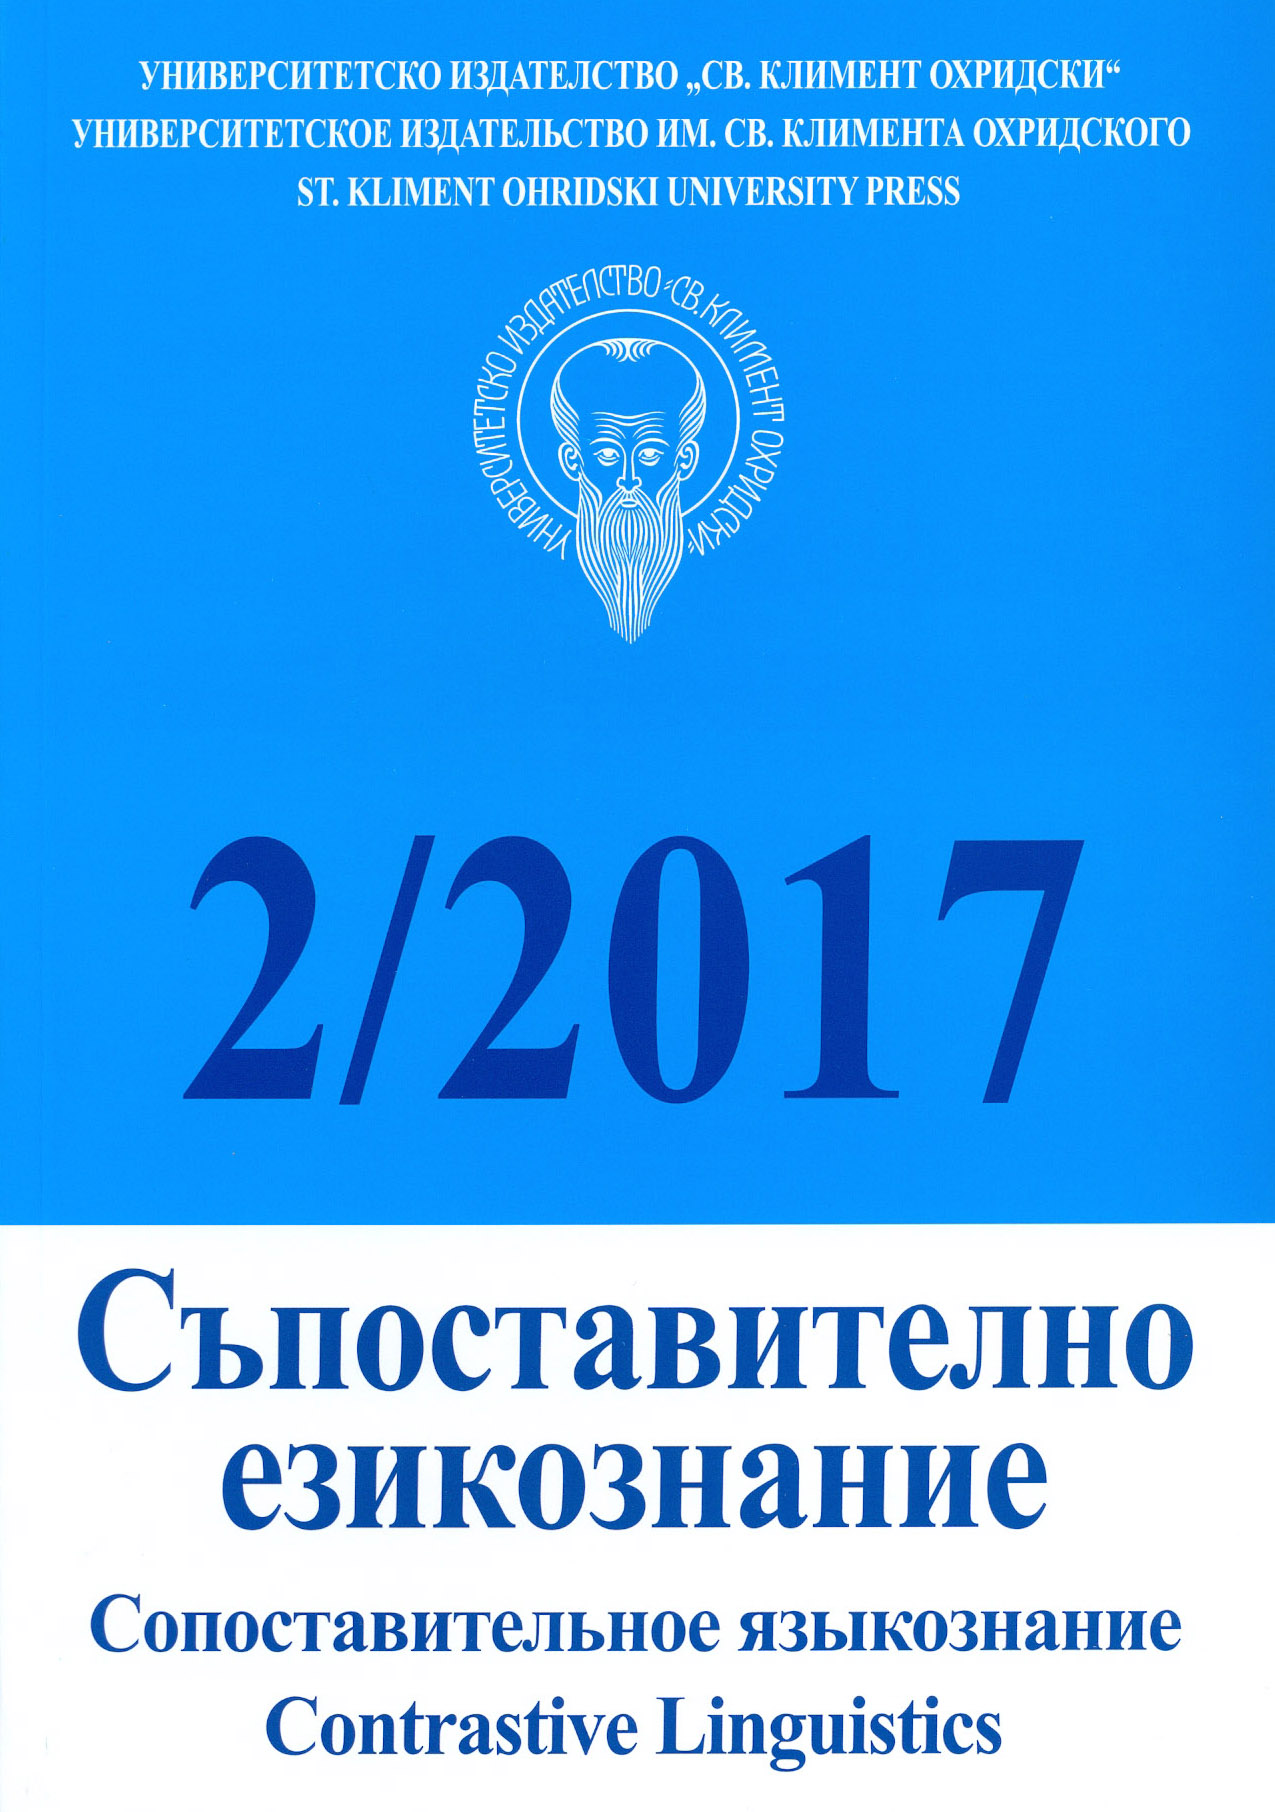 One hundred years School of Bulgarian Language and Literature at Charles University in Prague Cover Image